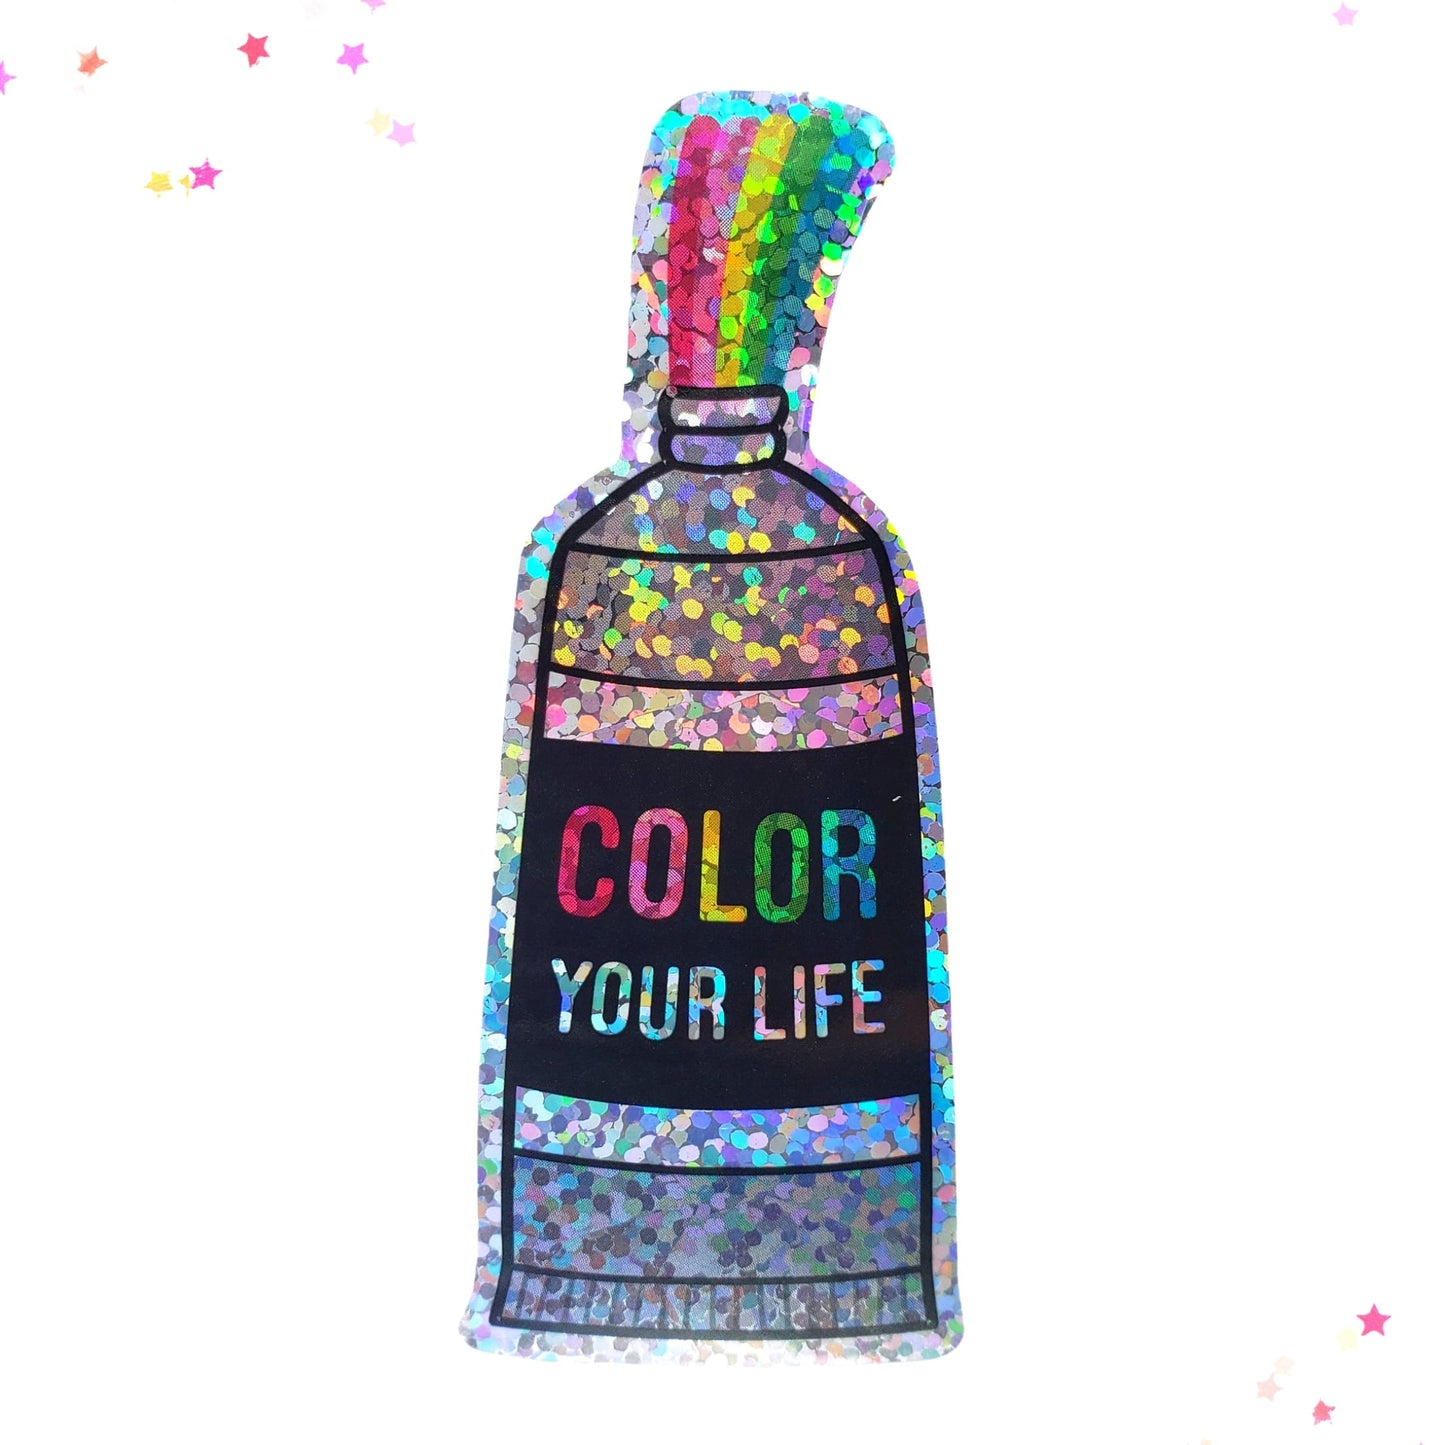 Premium Sticker - Sparkly Holographic Glitter Color Your Life from Confetti Kitty, Only 2.00